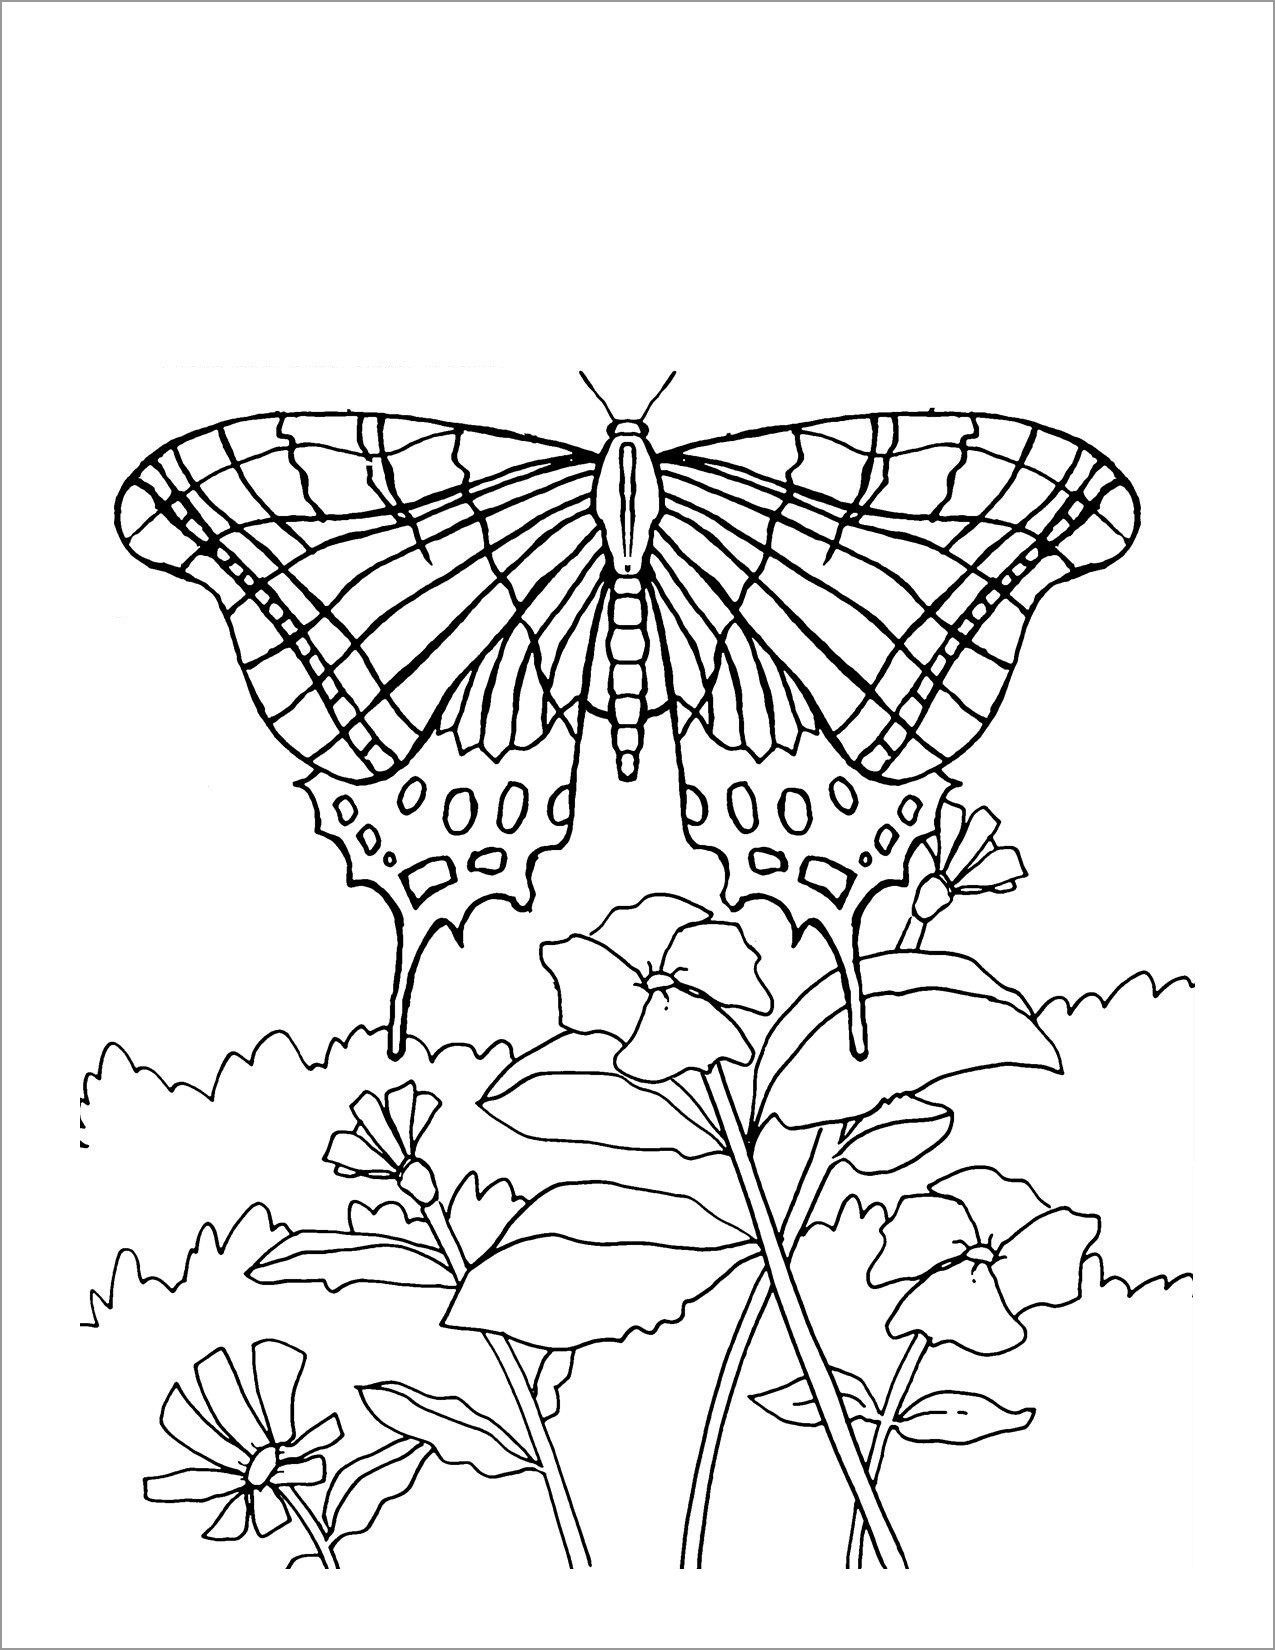 Flowers and butterflies Coloring Page